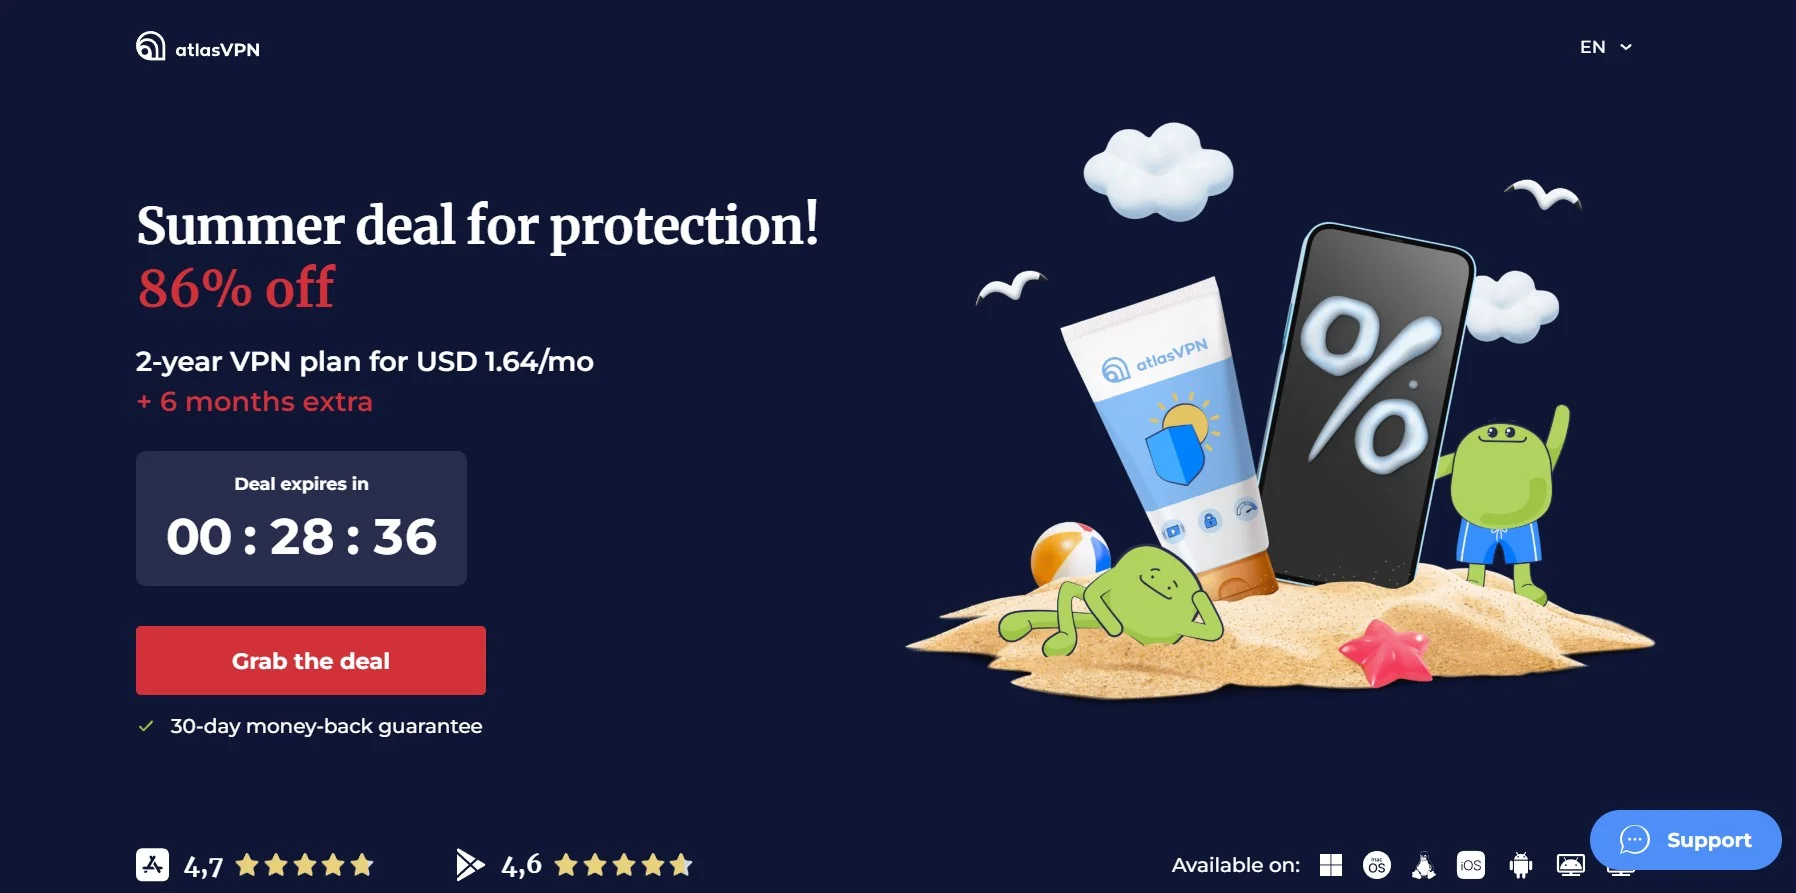 Atlas VPN is a virtual private network (VPN) service provider that offers secure and private internet access to its users